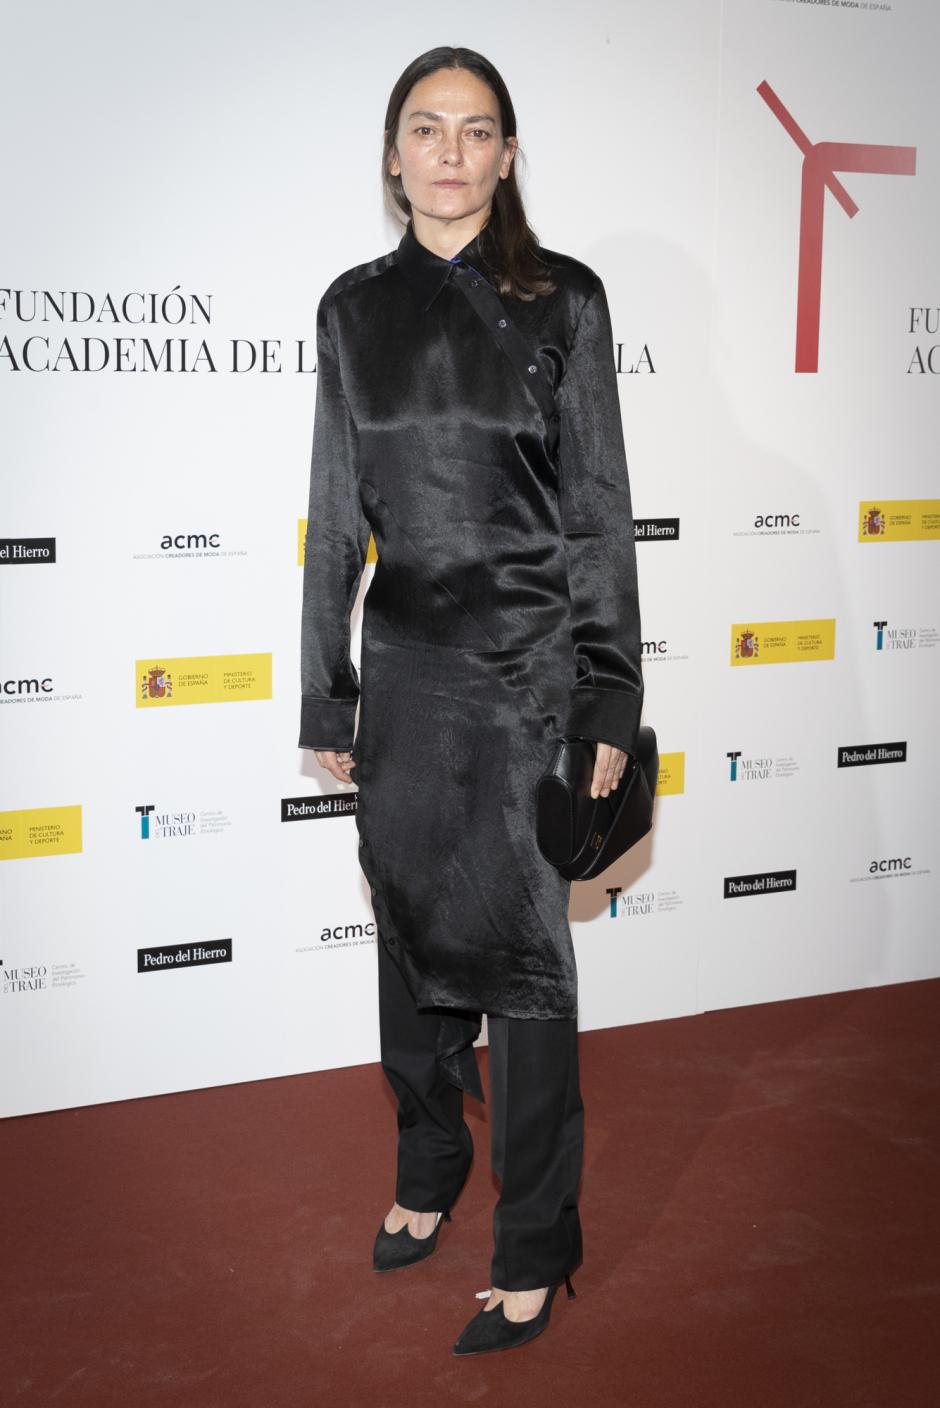 Former model Laura Ponte at the presentation photocall of the Spanish Fashion Academy Foundation (FAME) in Madrid on Thursday, May 26, 2022.